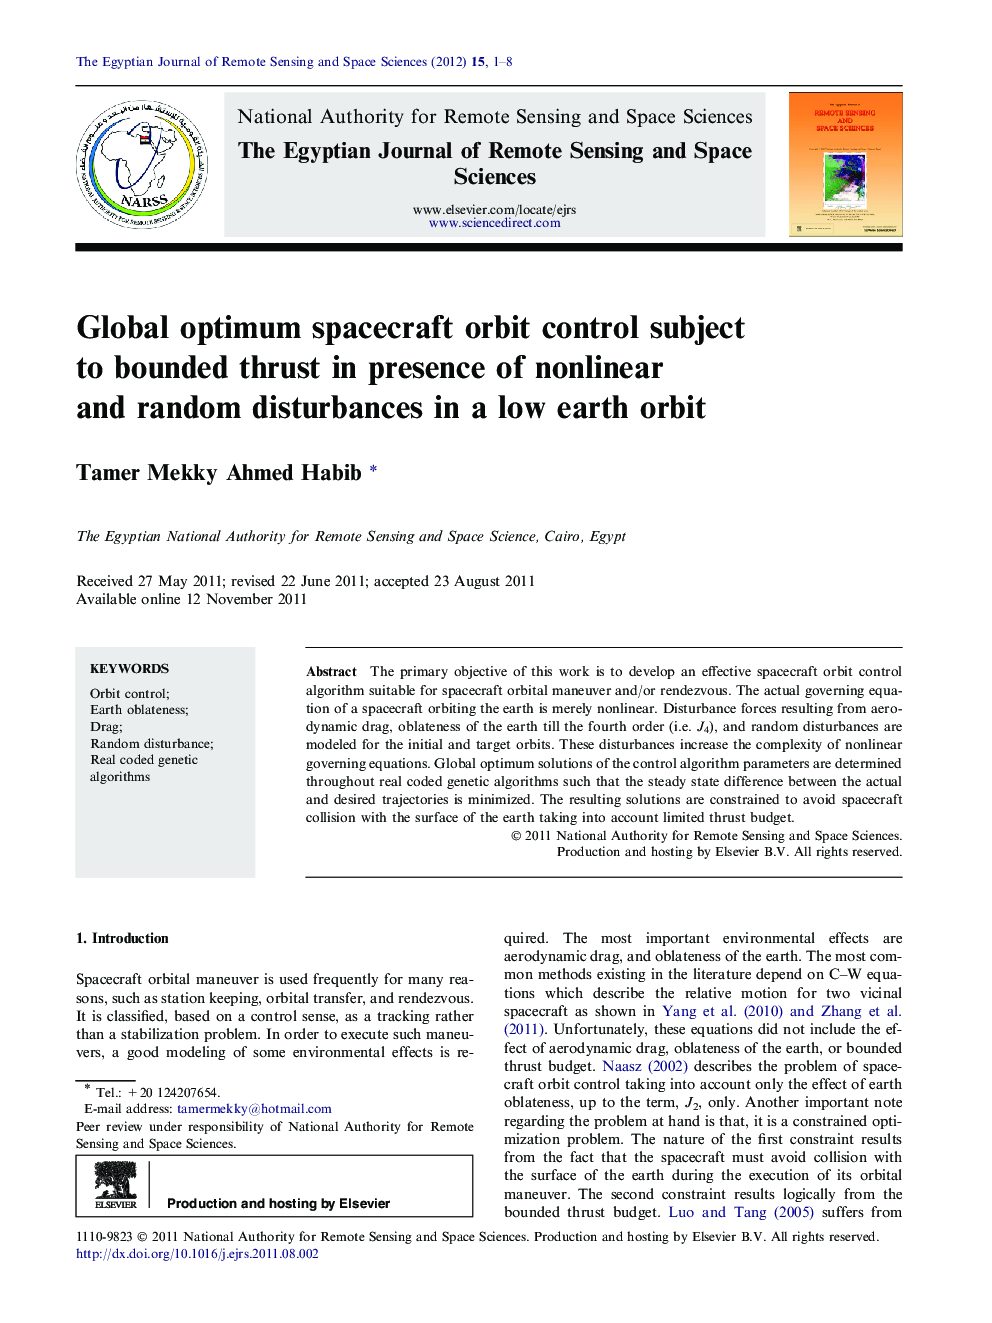 Global optimum spacecraft orbit control subject to bounded thrust in presence of nonlinear and random disturbances in a low earth orbit 